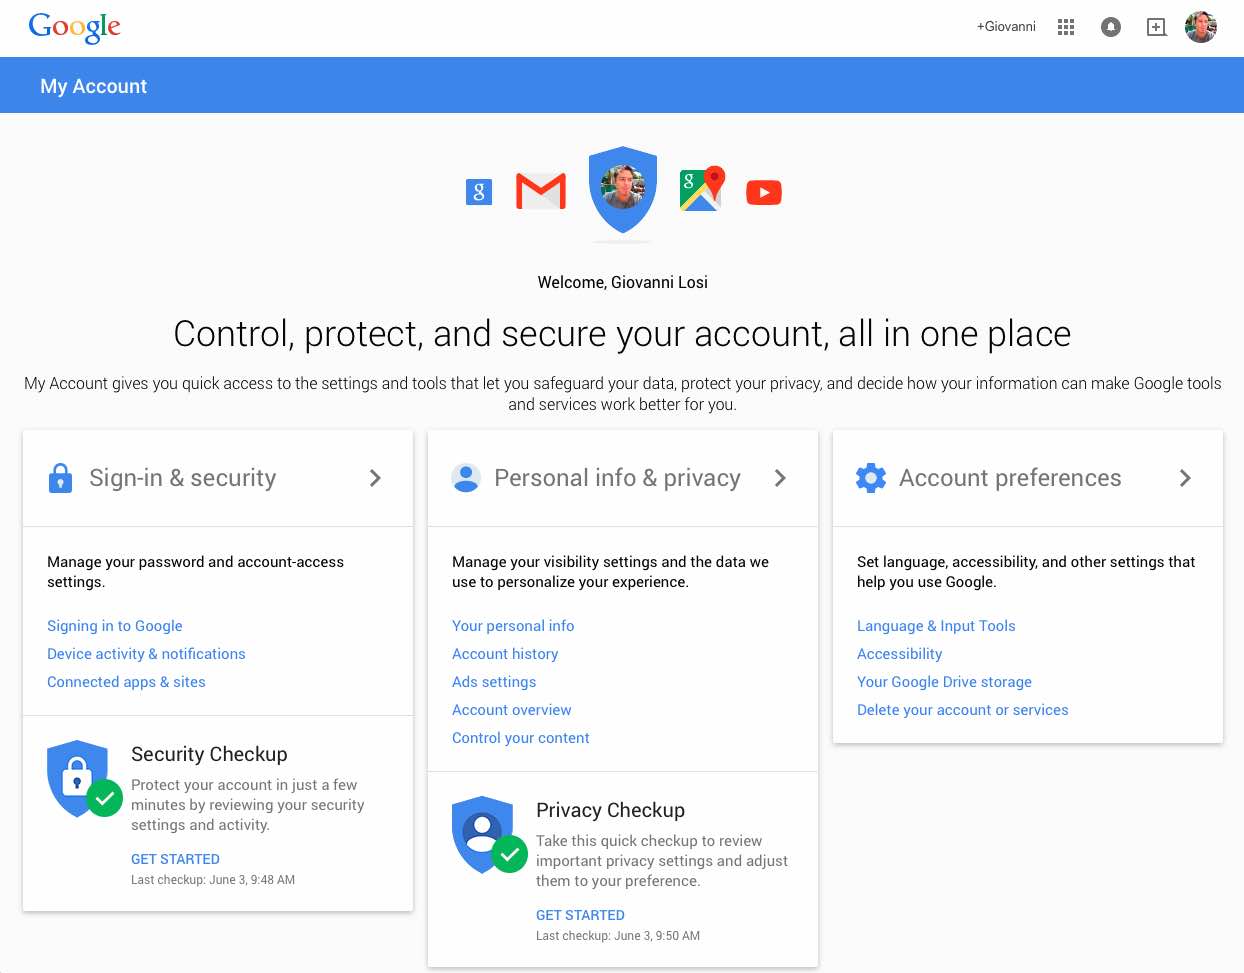 Google privacy and security options